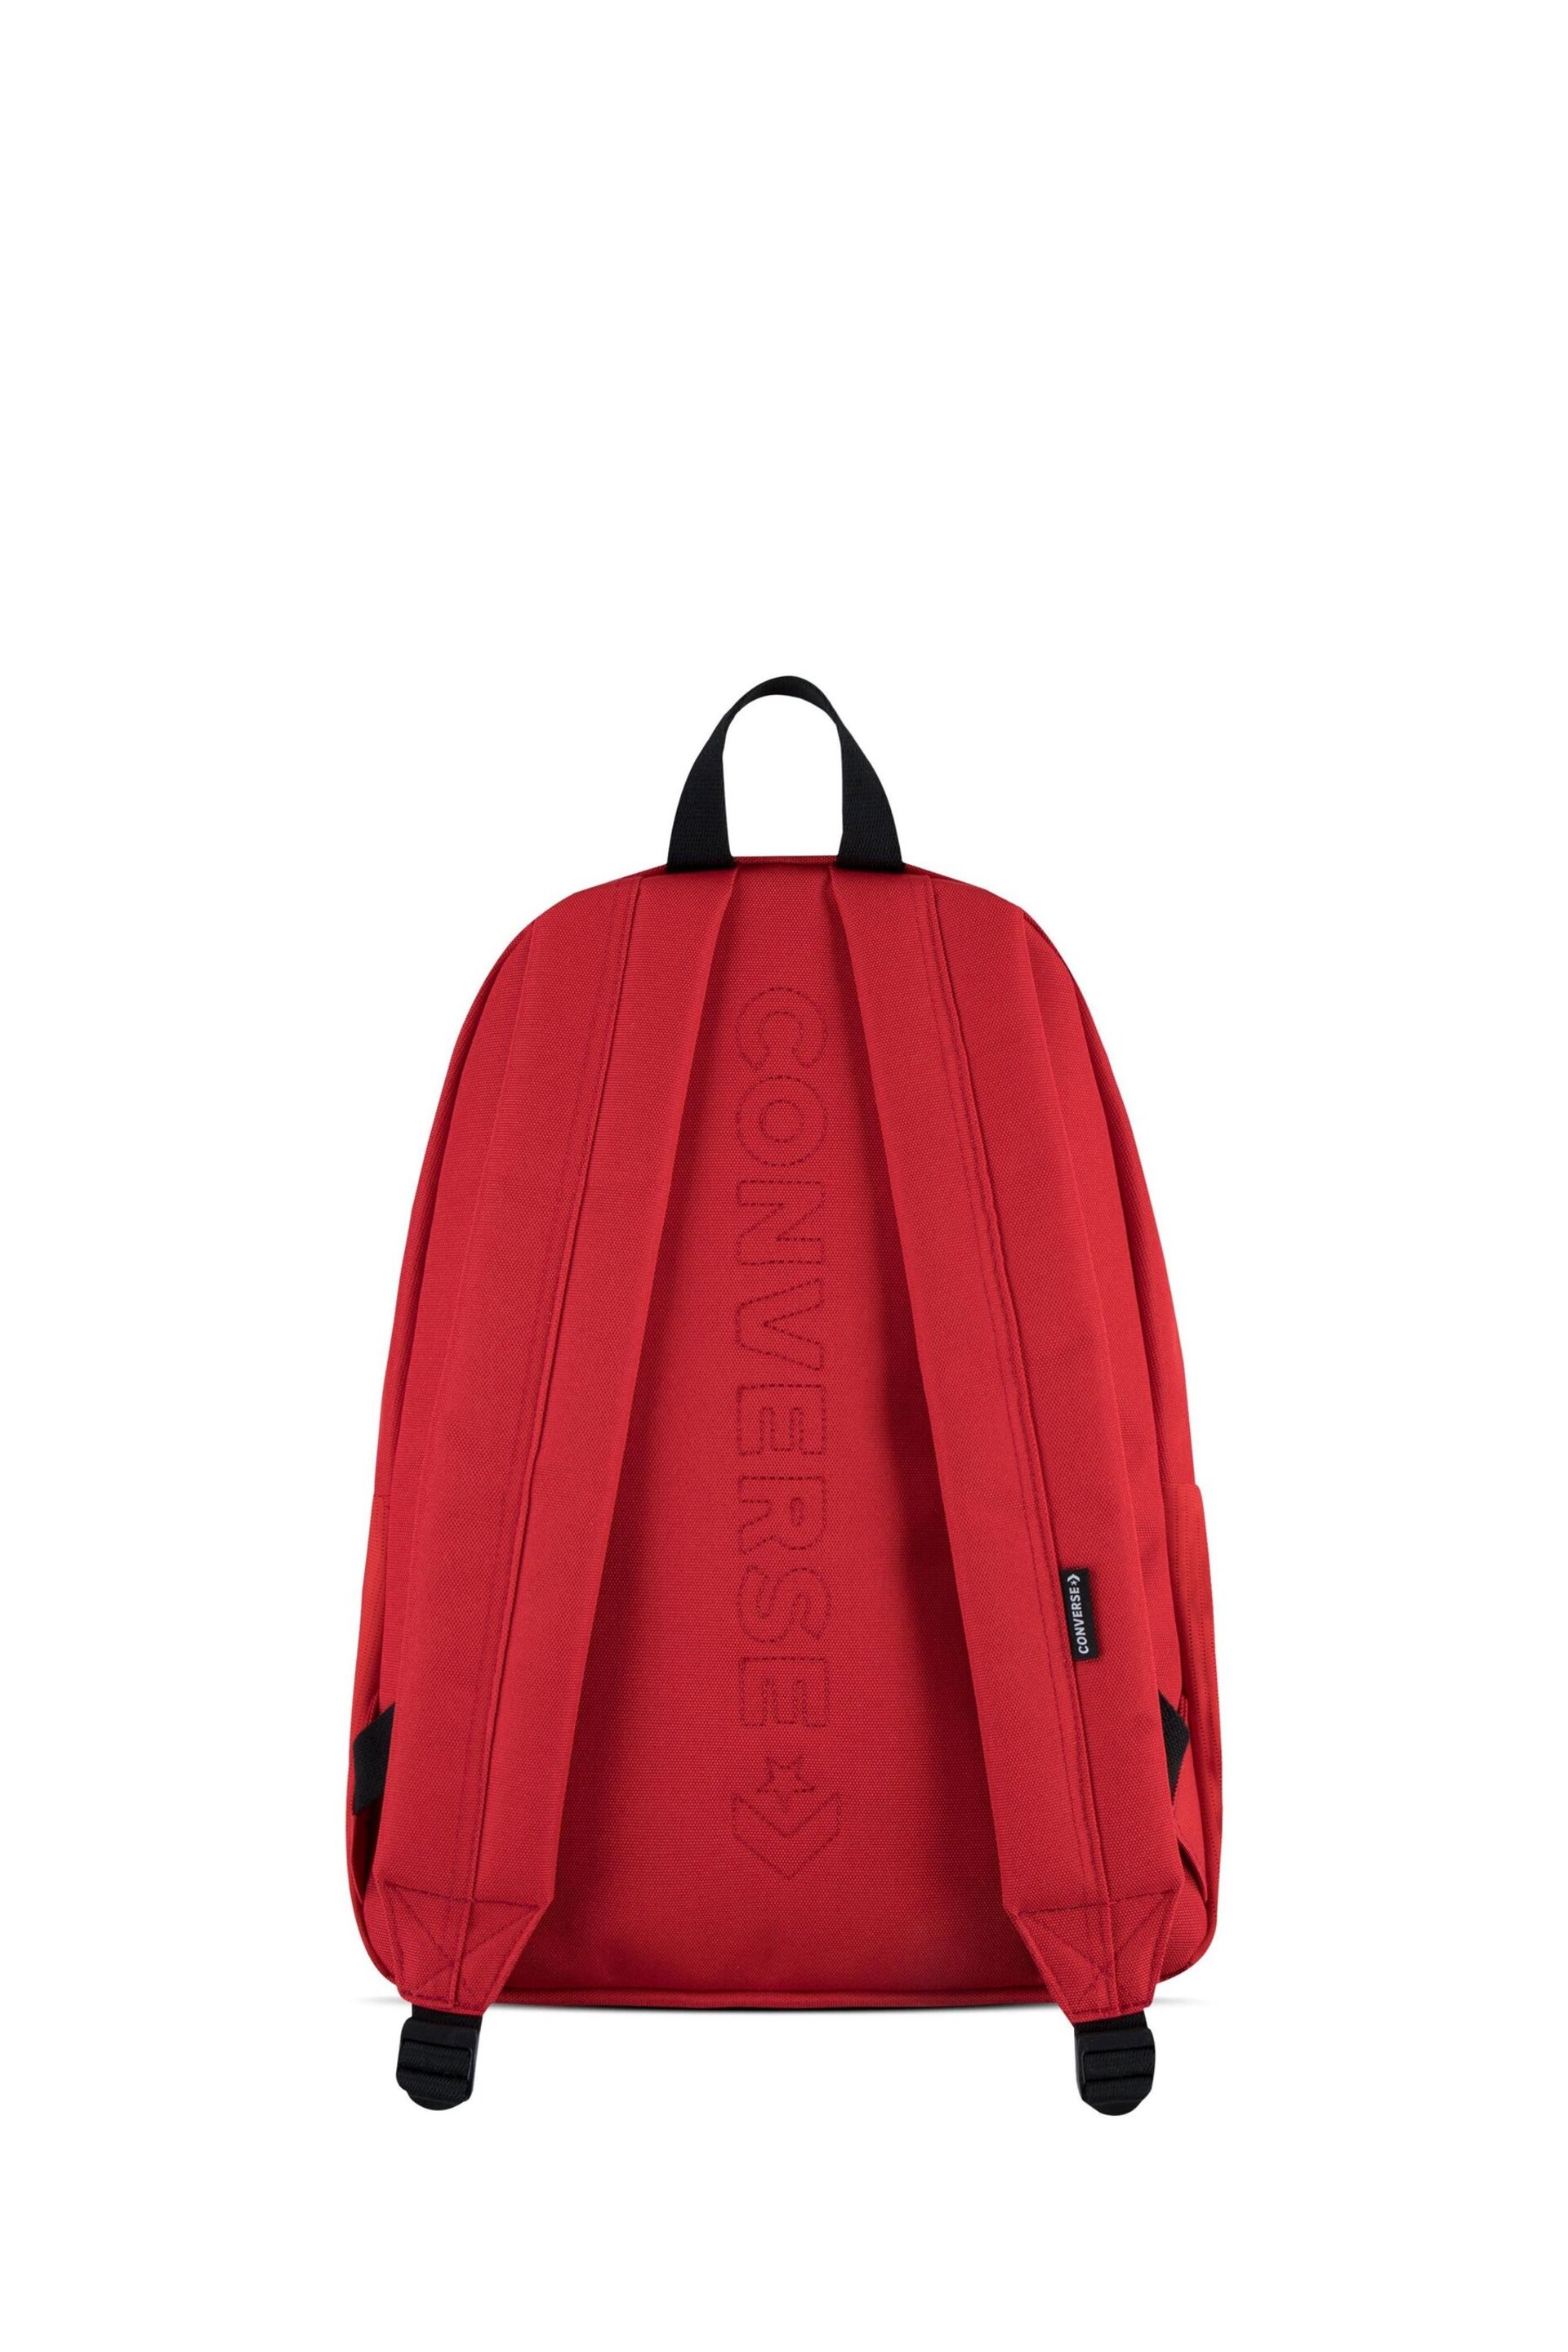 Converse Red Kids Backpack - Image 2 of 10